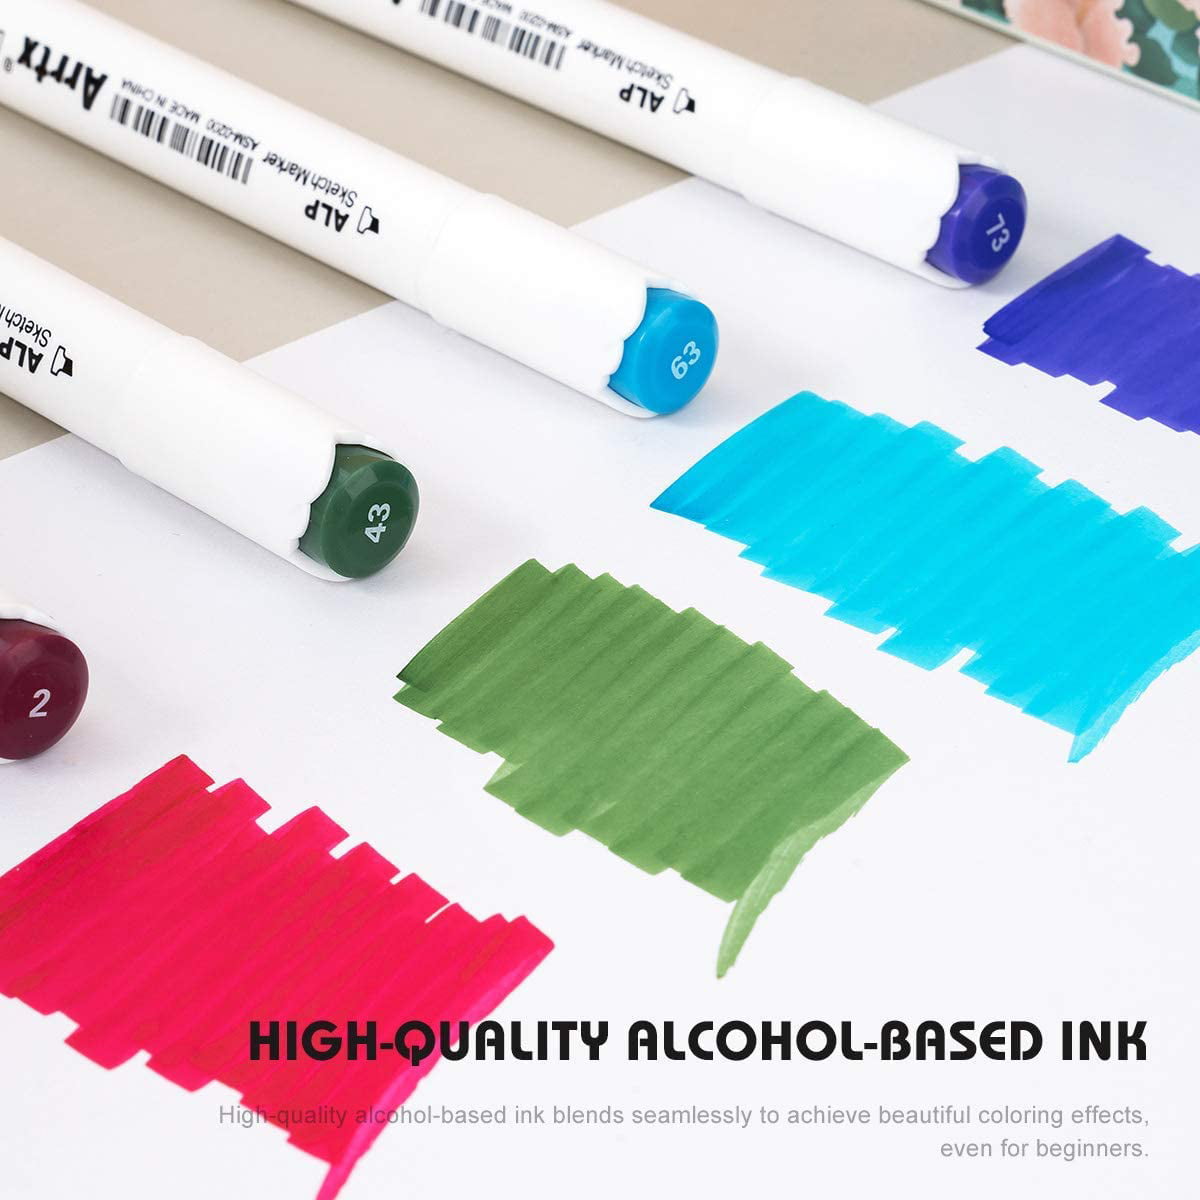 Arrtx Art Supplies on Instagram: 🎨✨Look here, Arrtx will announce a new  alcohol marker set next week, it is a great color collection for summer!  Get ready to unleash your imagination with